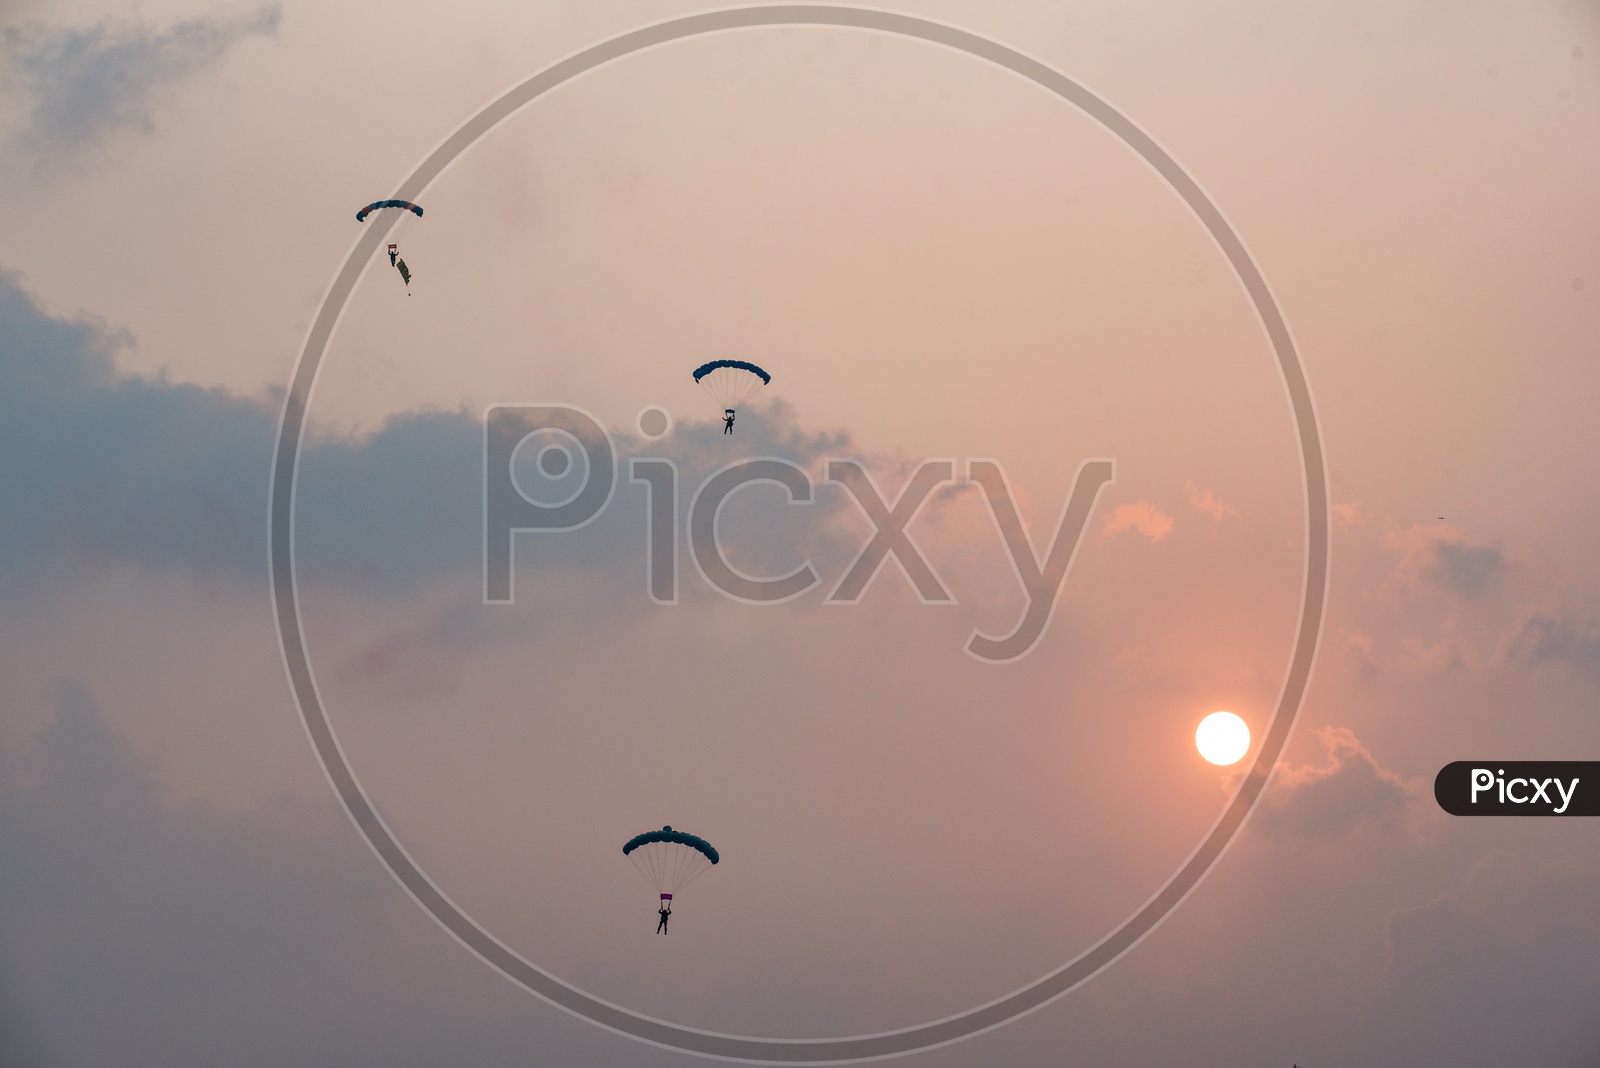 Indian Naval officers perform a paragliding stunt during Indian Navy Day celebrations, Visakhapatnam,December 4,2019